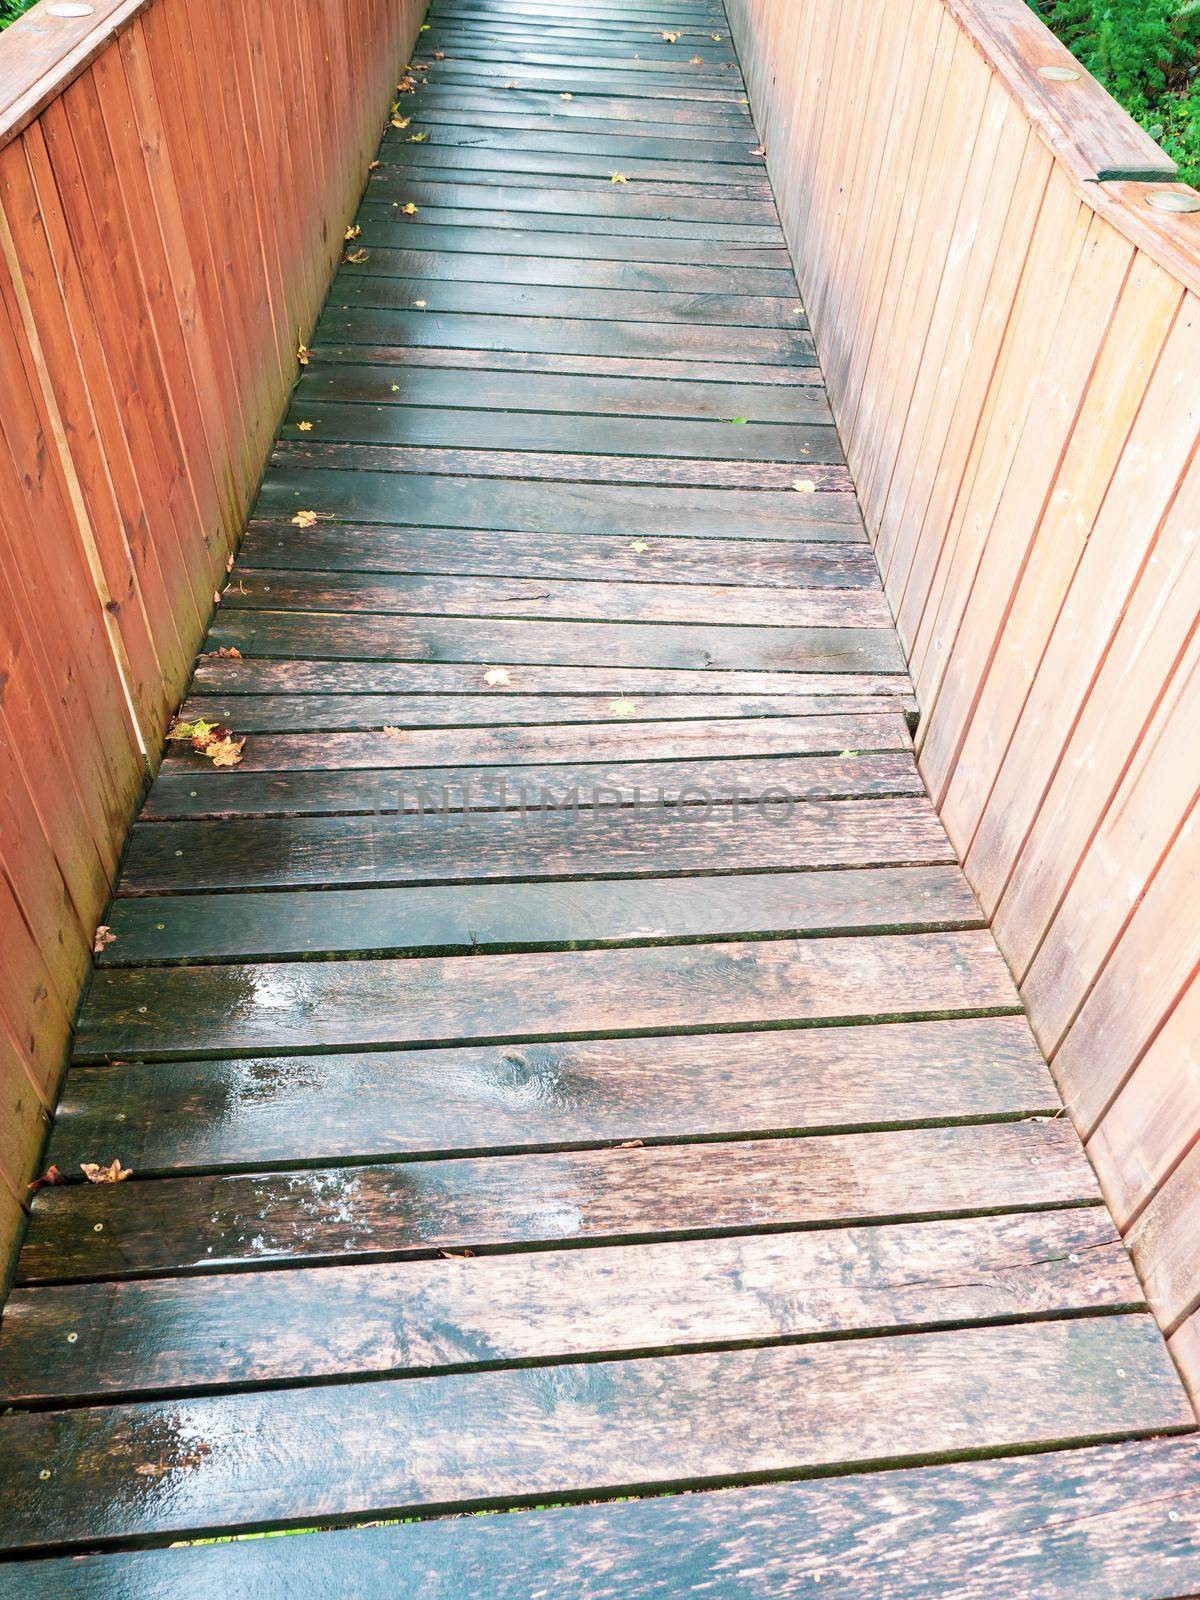 Wet wooden path for wheelchairs, another castle entrance. by rdonar2